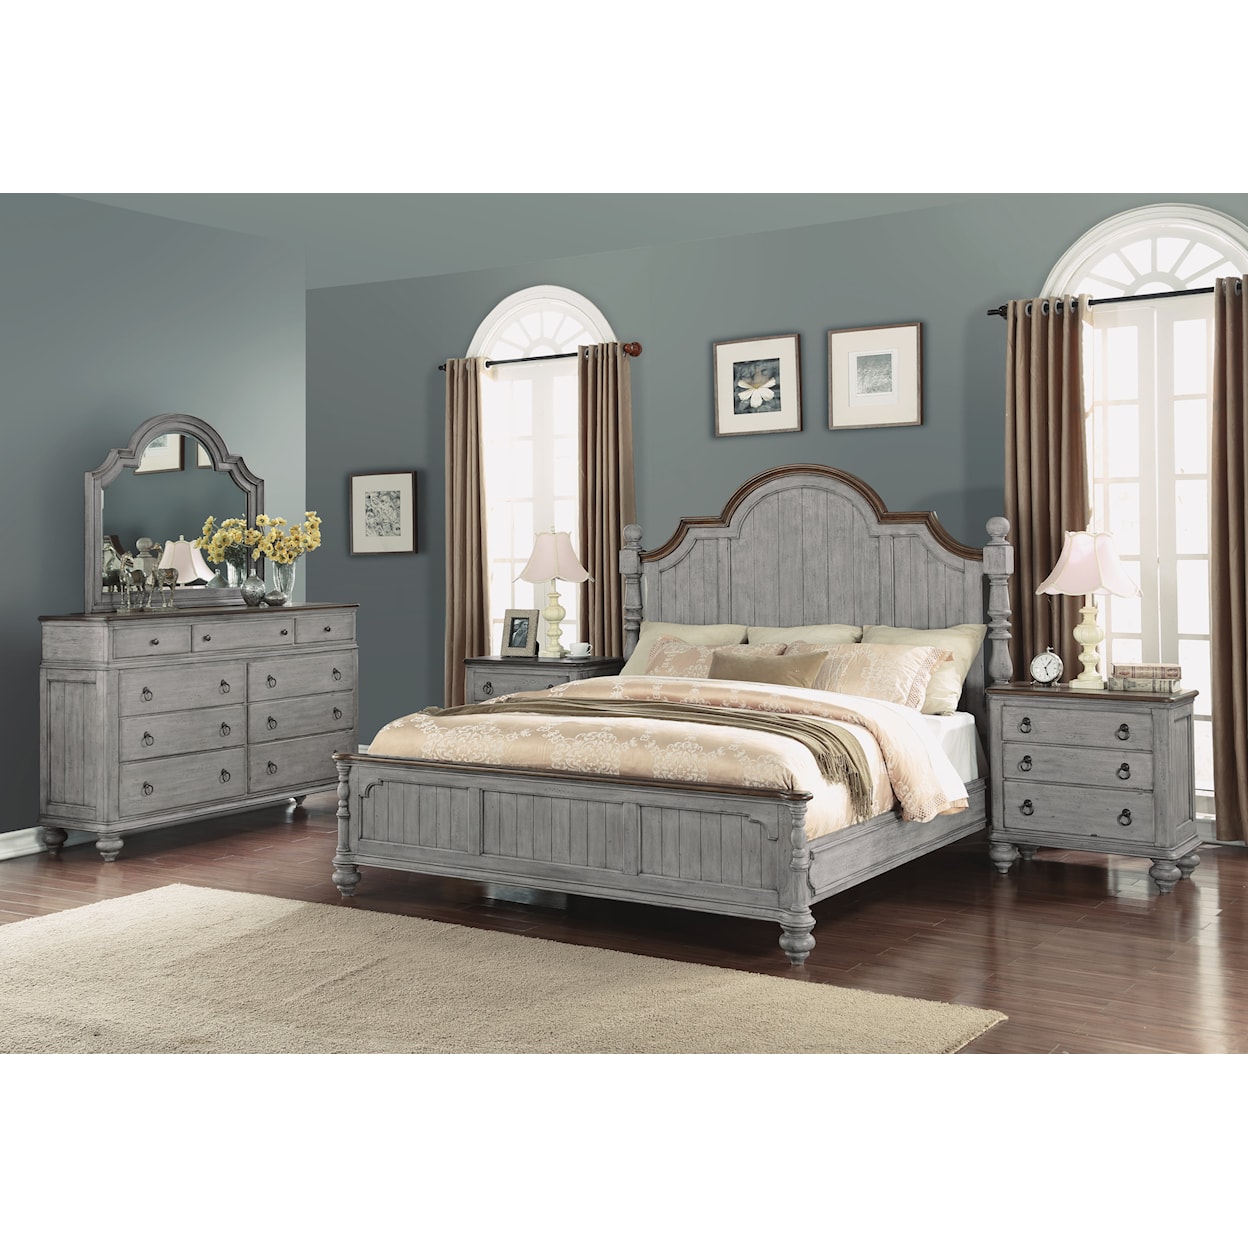 Flexsteel Wynwood Collection Plymouth Cal King Bedroom Group